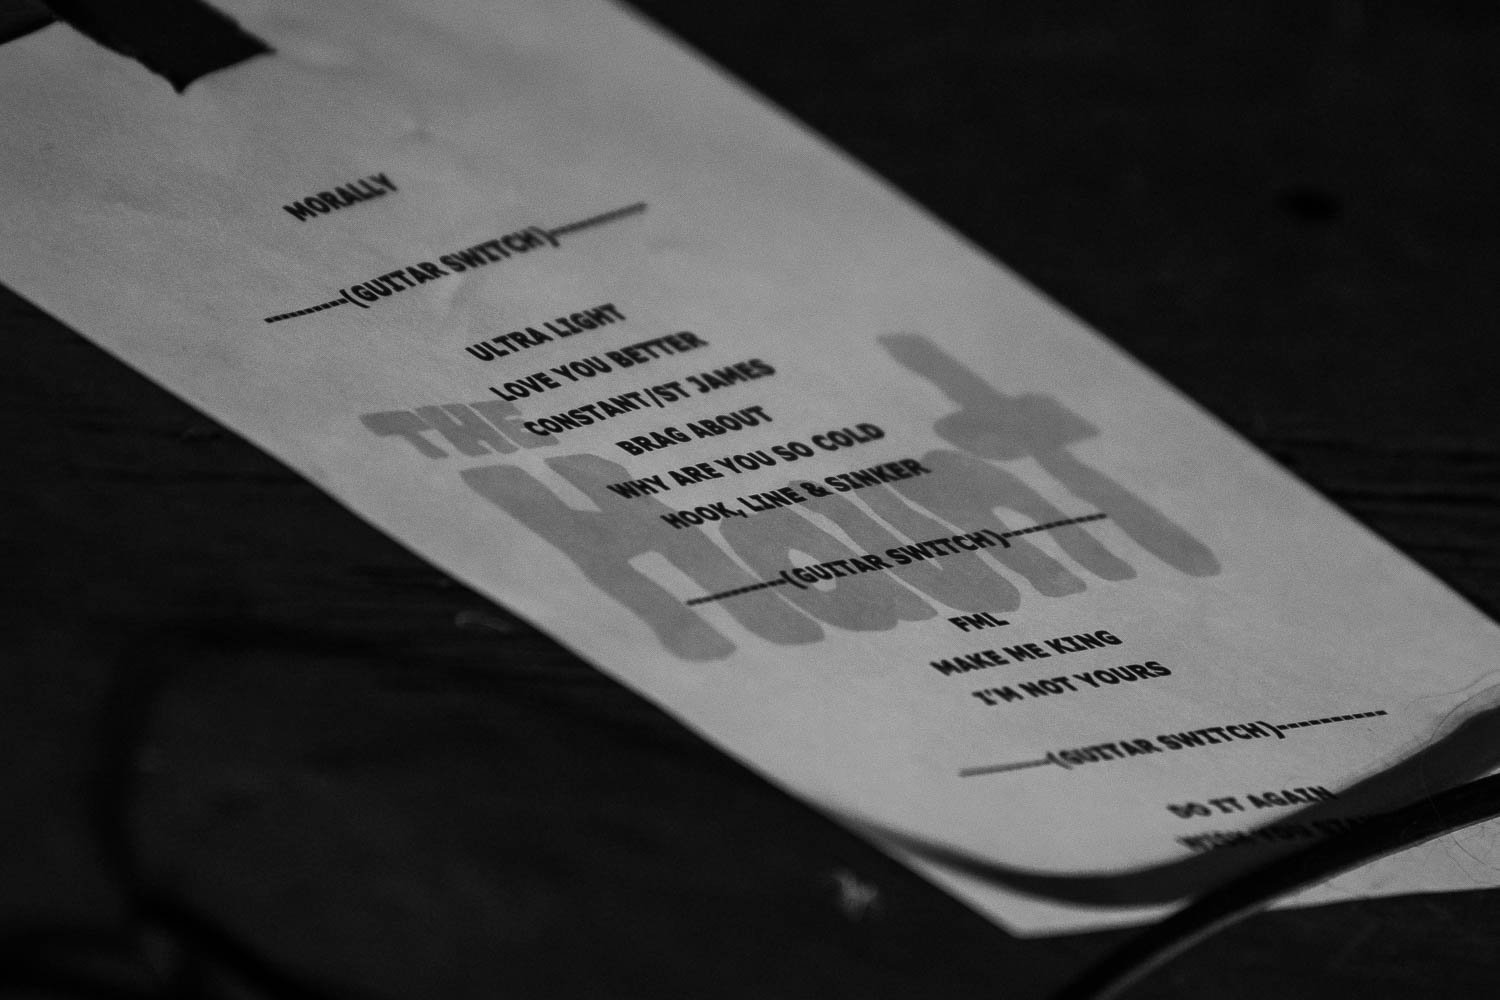 The Haunt's setlist for The Truman in Kansas City, Missouri on May 4, 2022